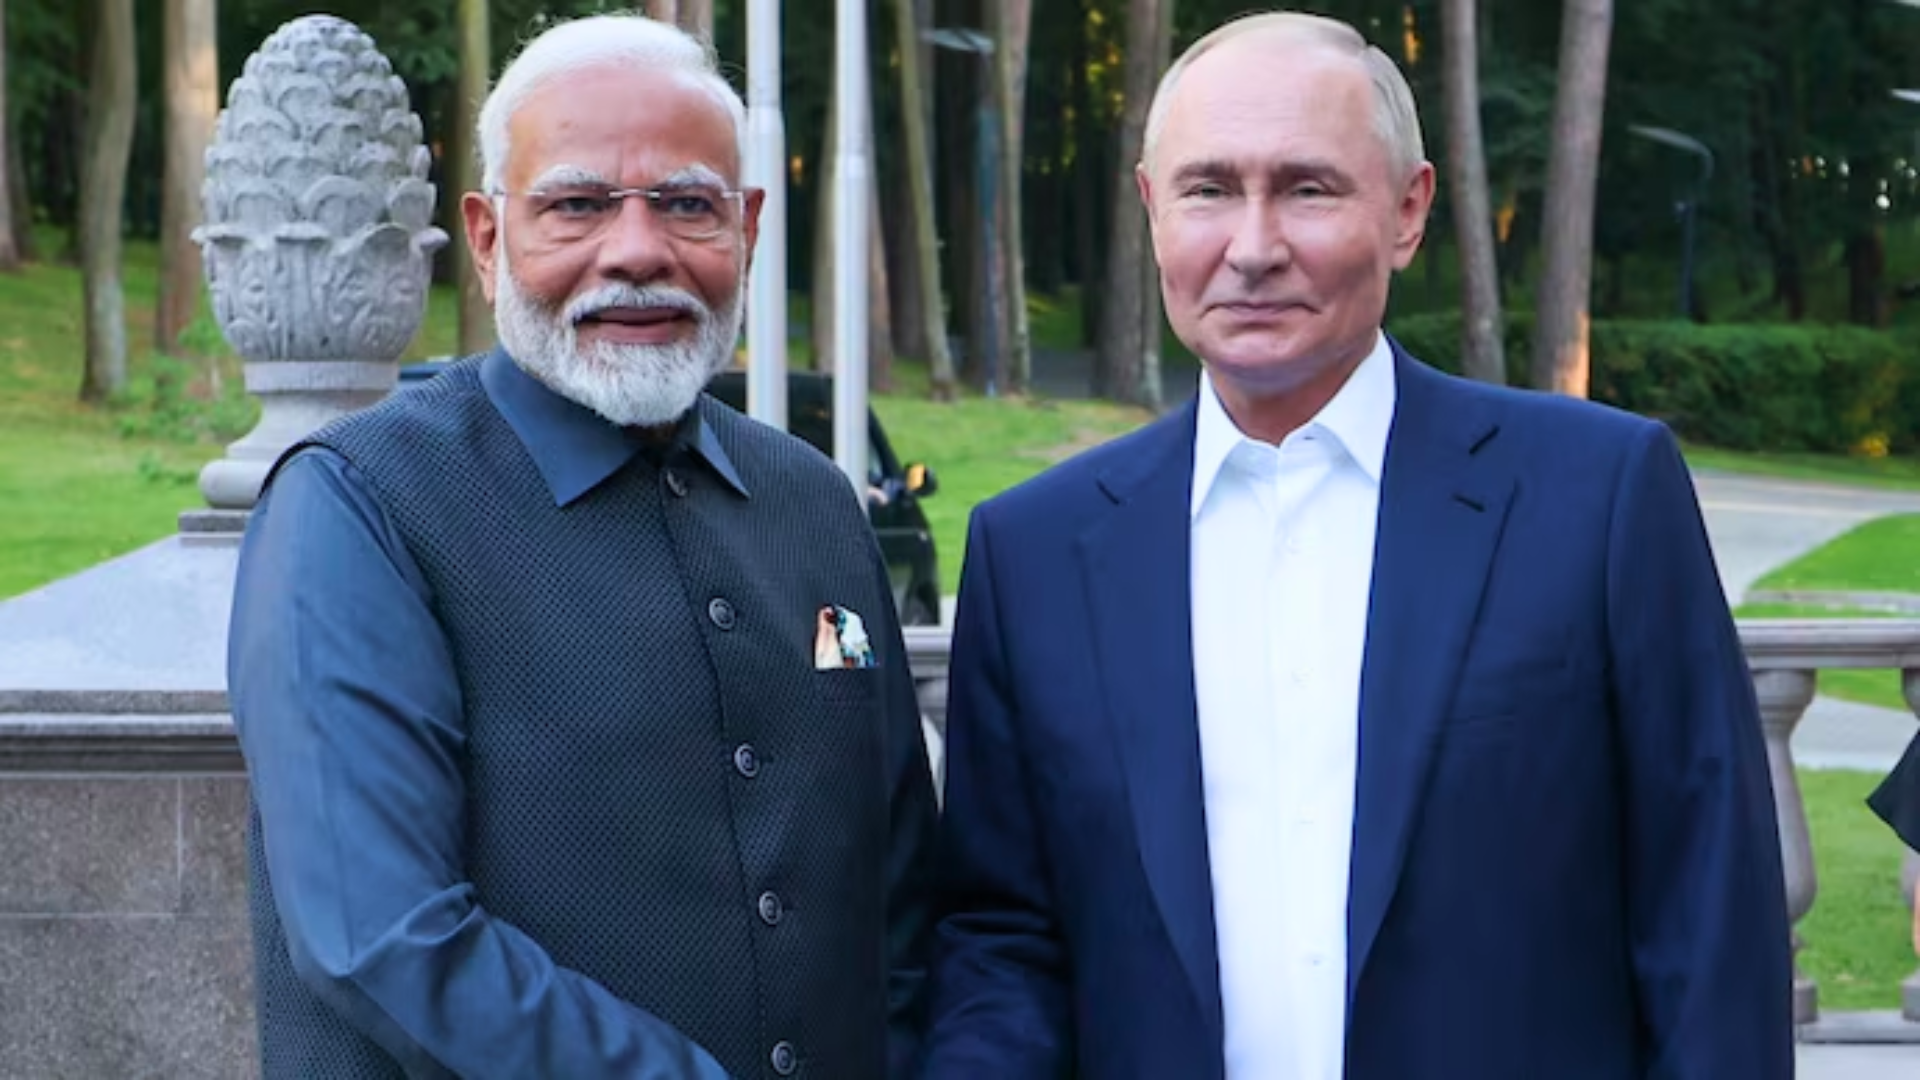 Putin Applauds PM Modi’s ‘Great Energy’ Amid His Visit In Russia Says, ‘You Have Devoted Your Whole Life For Public Service’